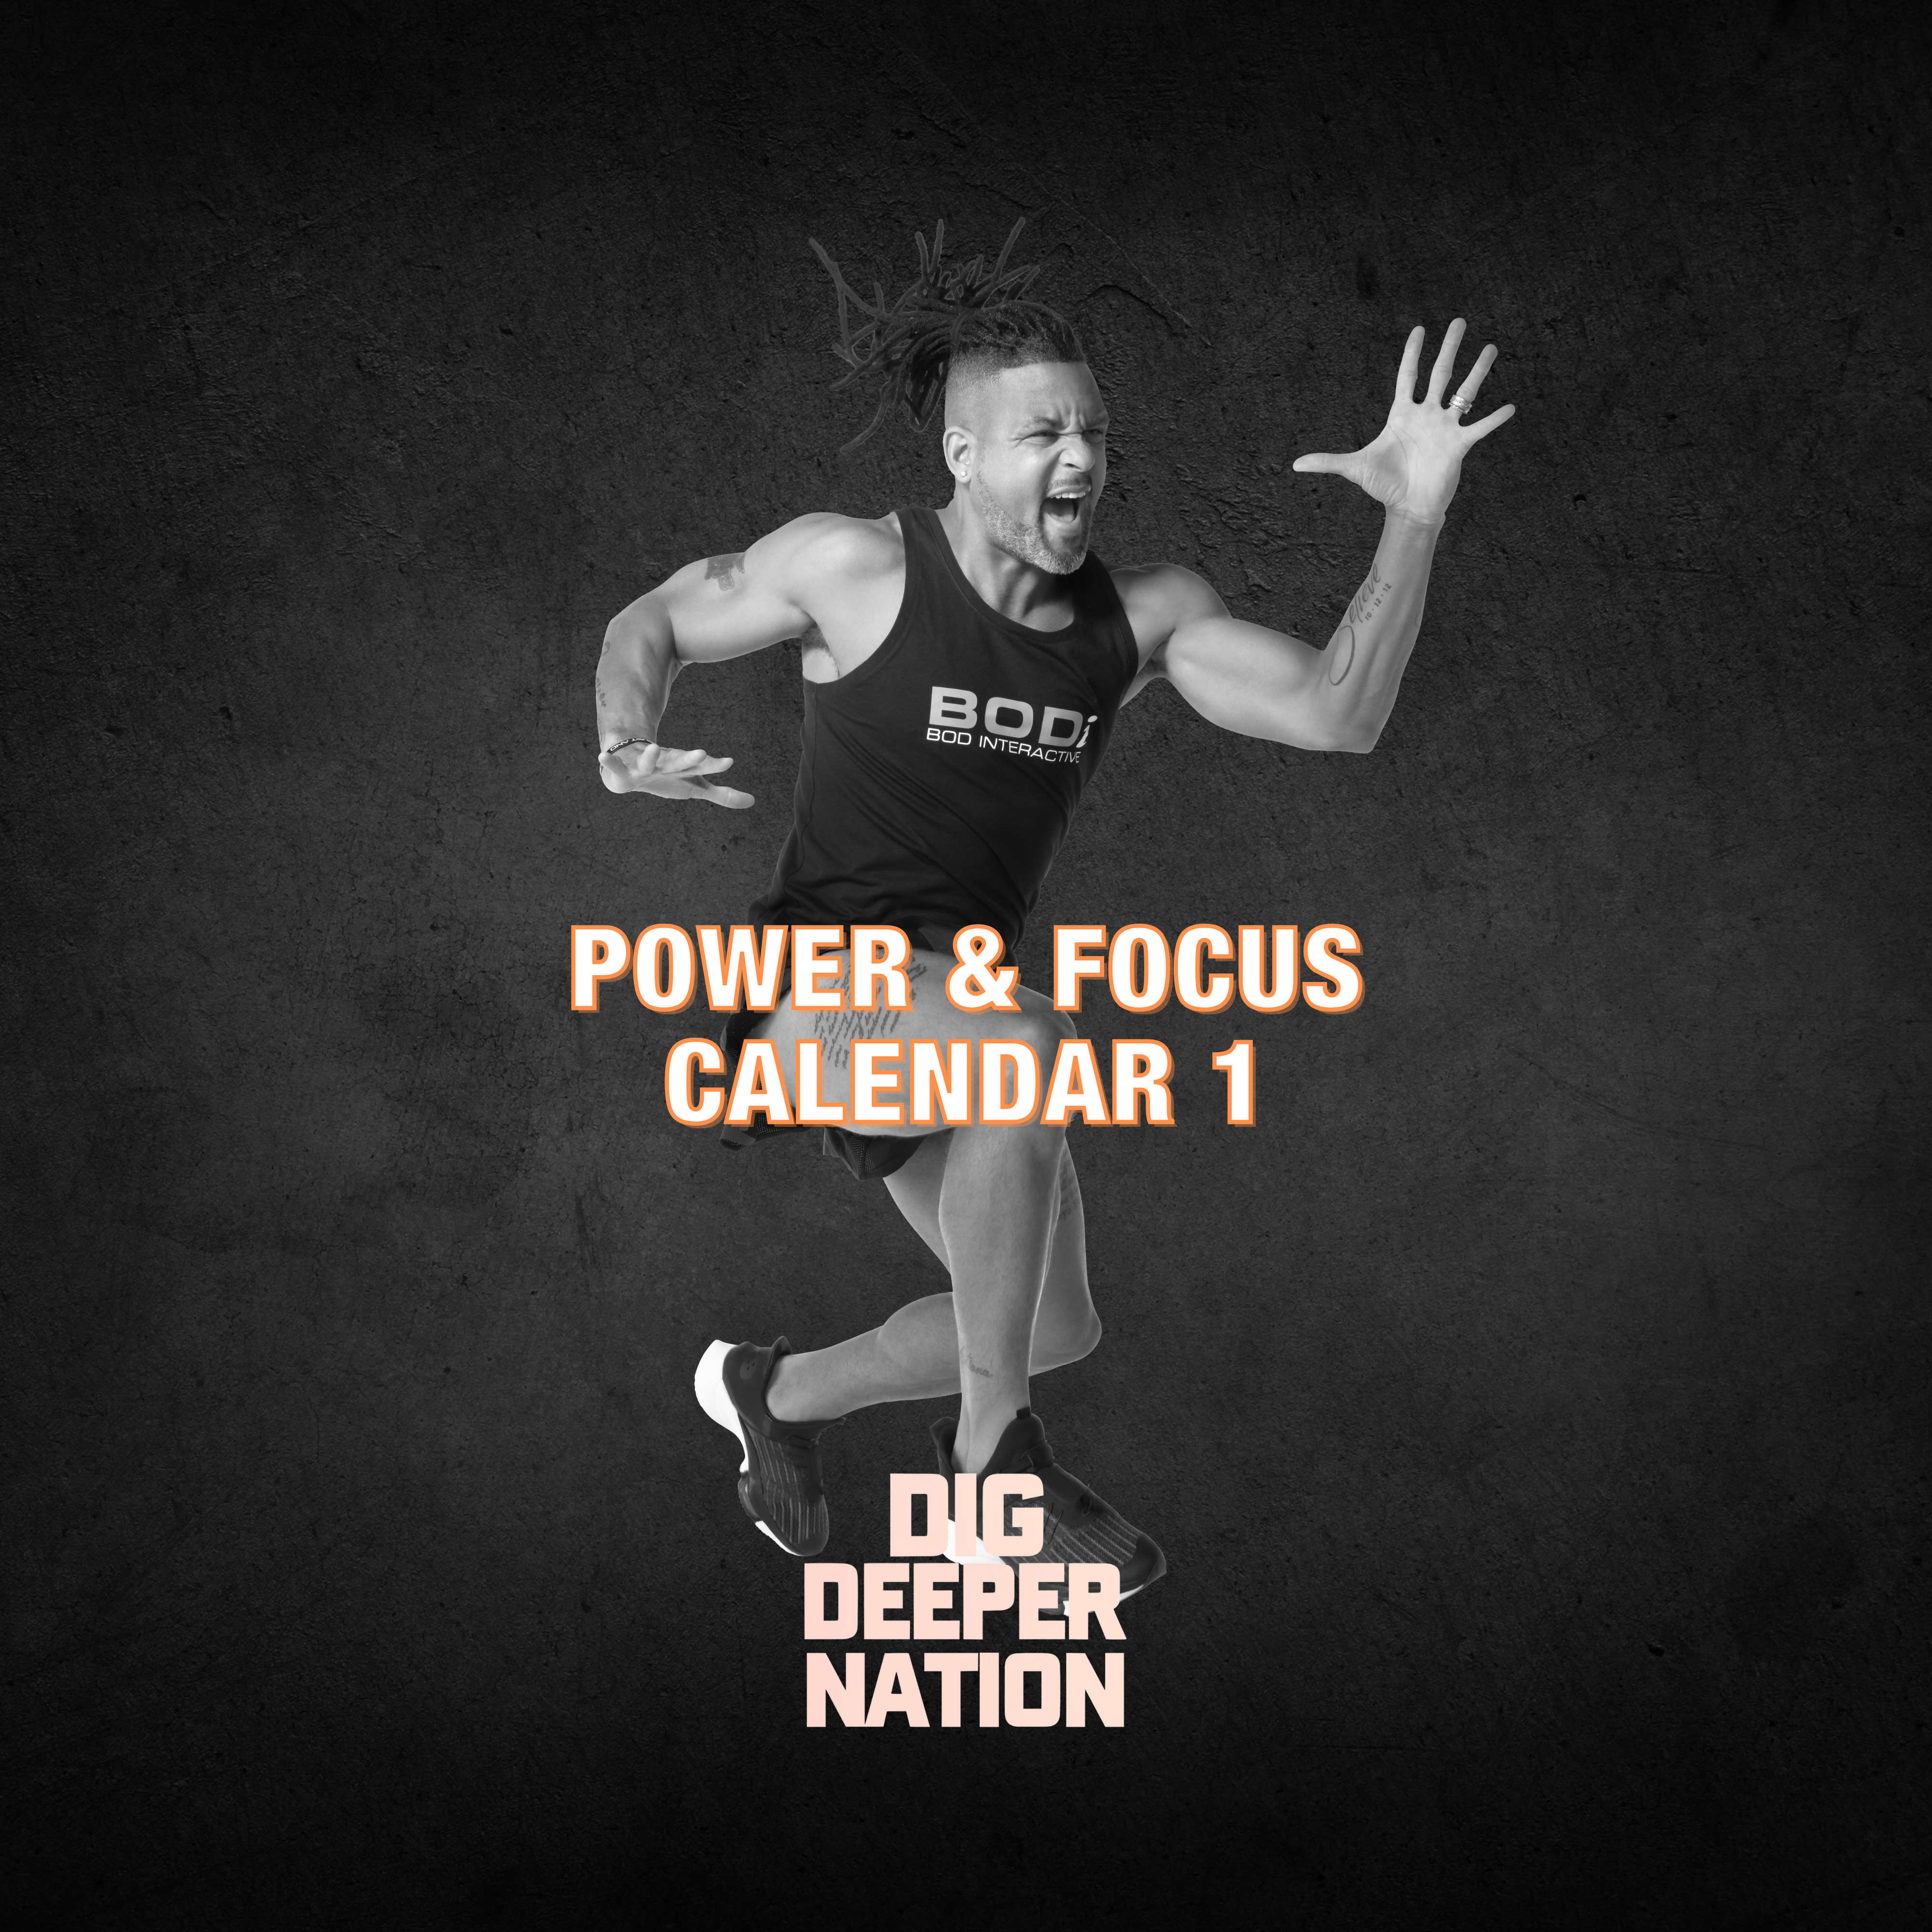 Black background with Shaun T in foreground power jumping with text overlay that says "Power and Focus Calendar 1"